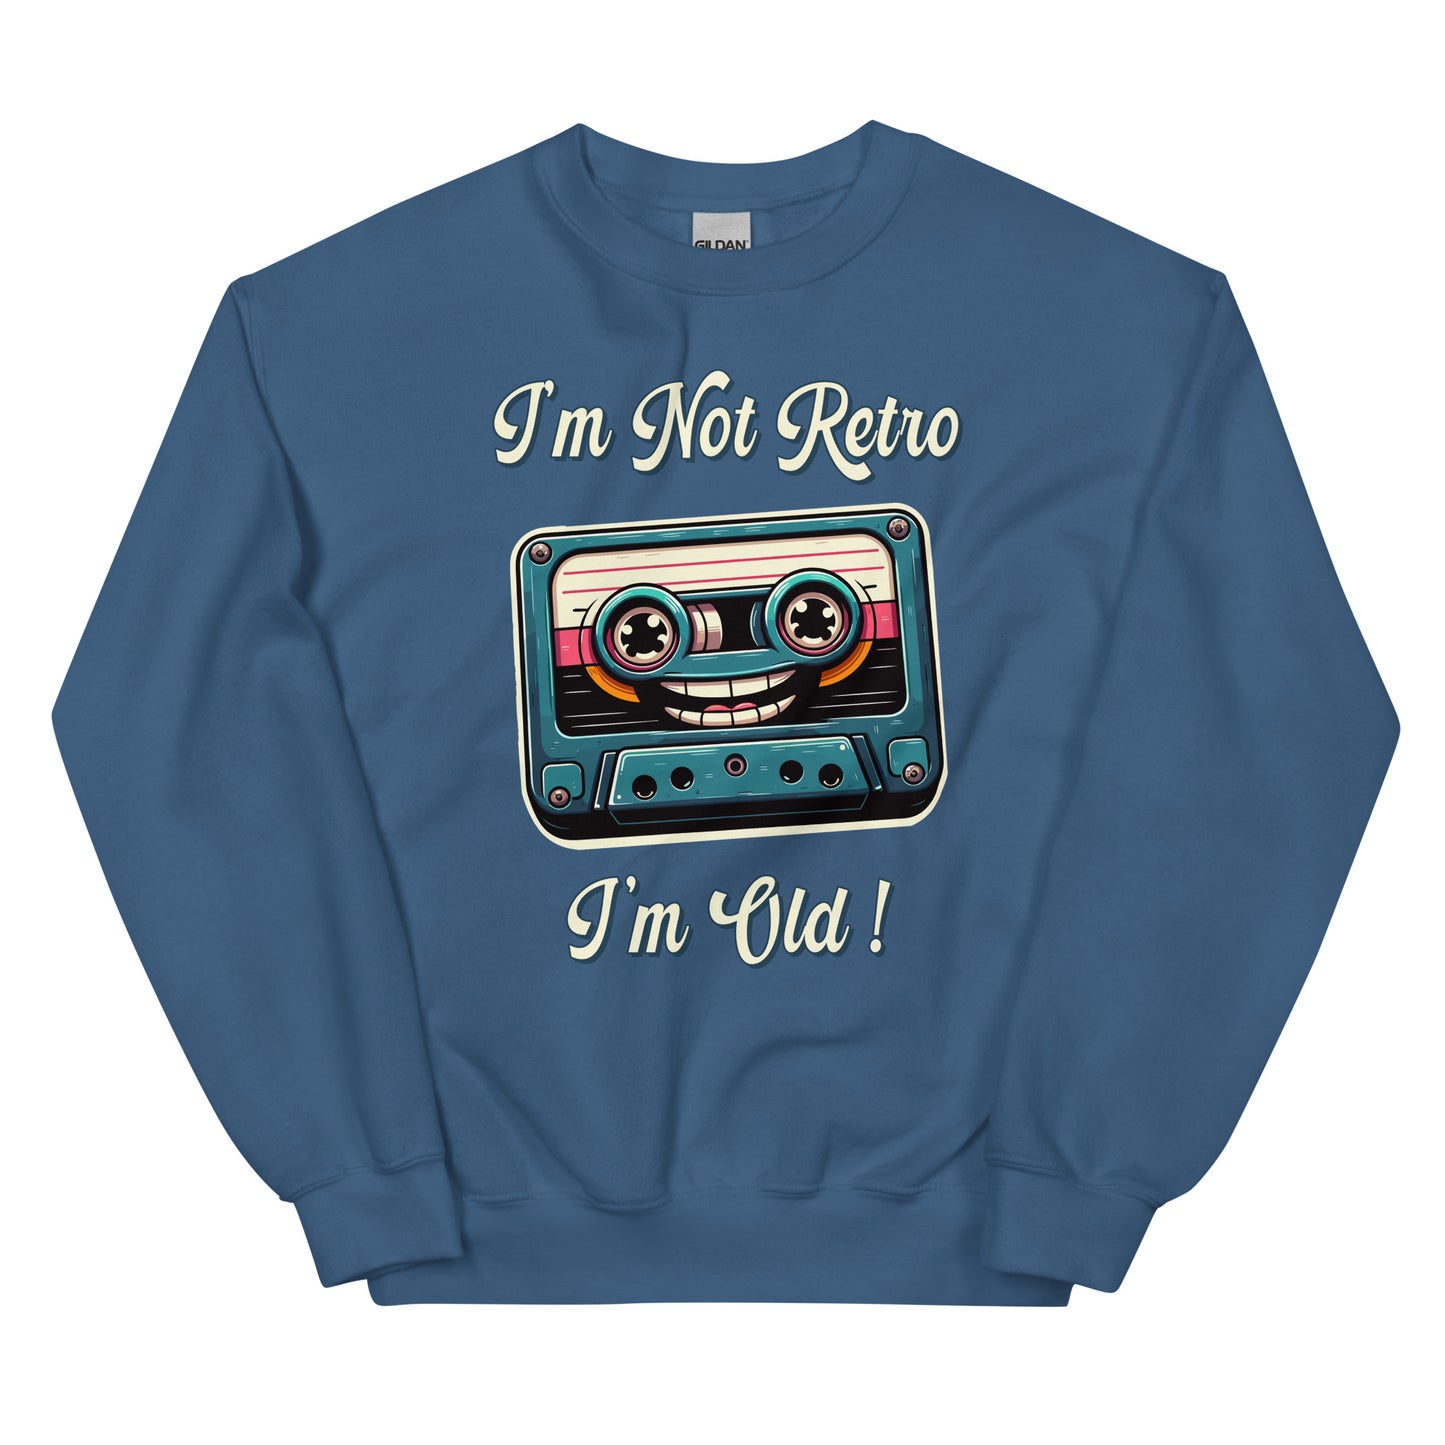 I'm not retro I'm old with picture of a cassette tape smiling printed crewneck by Whistler Shirts